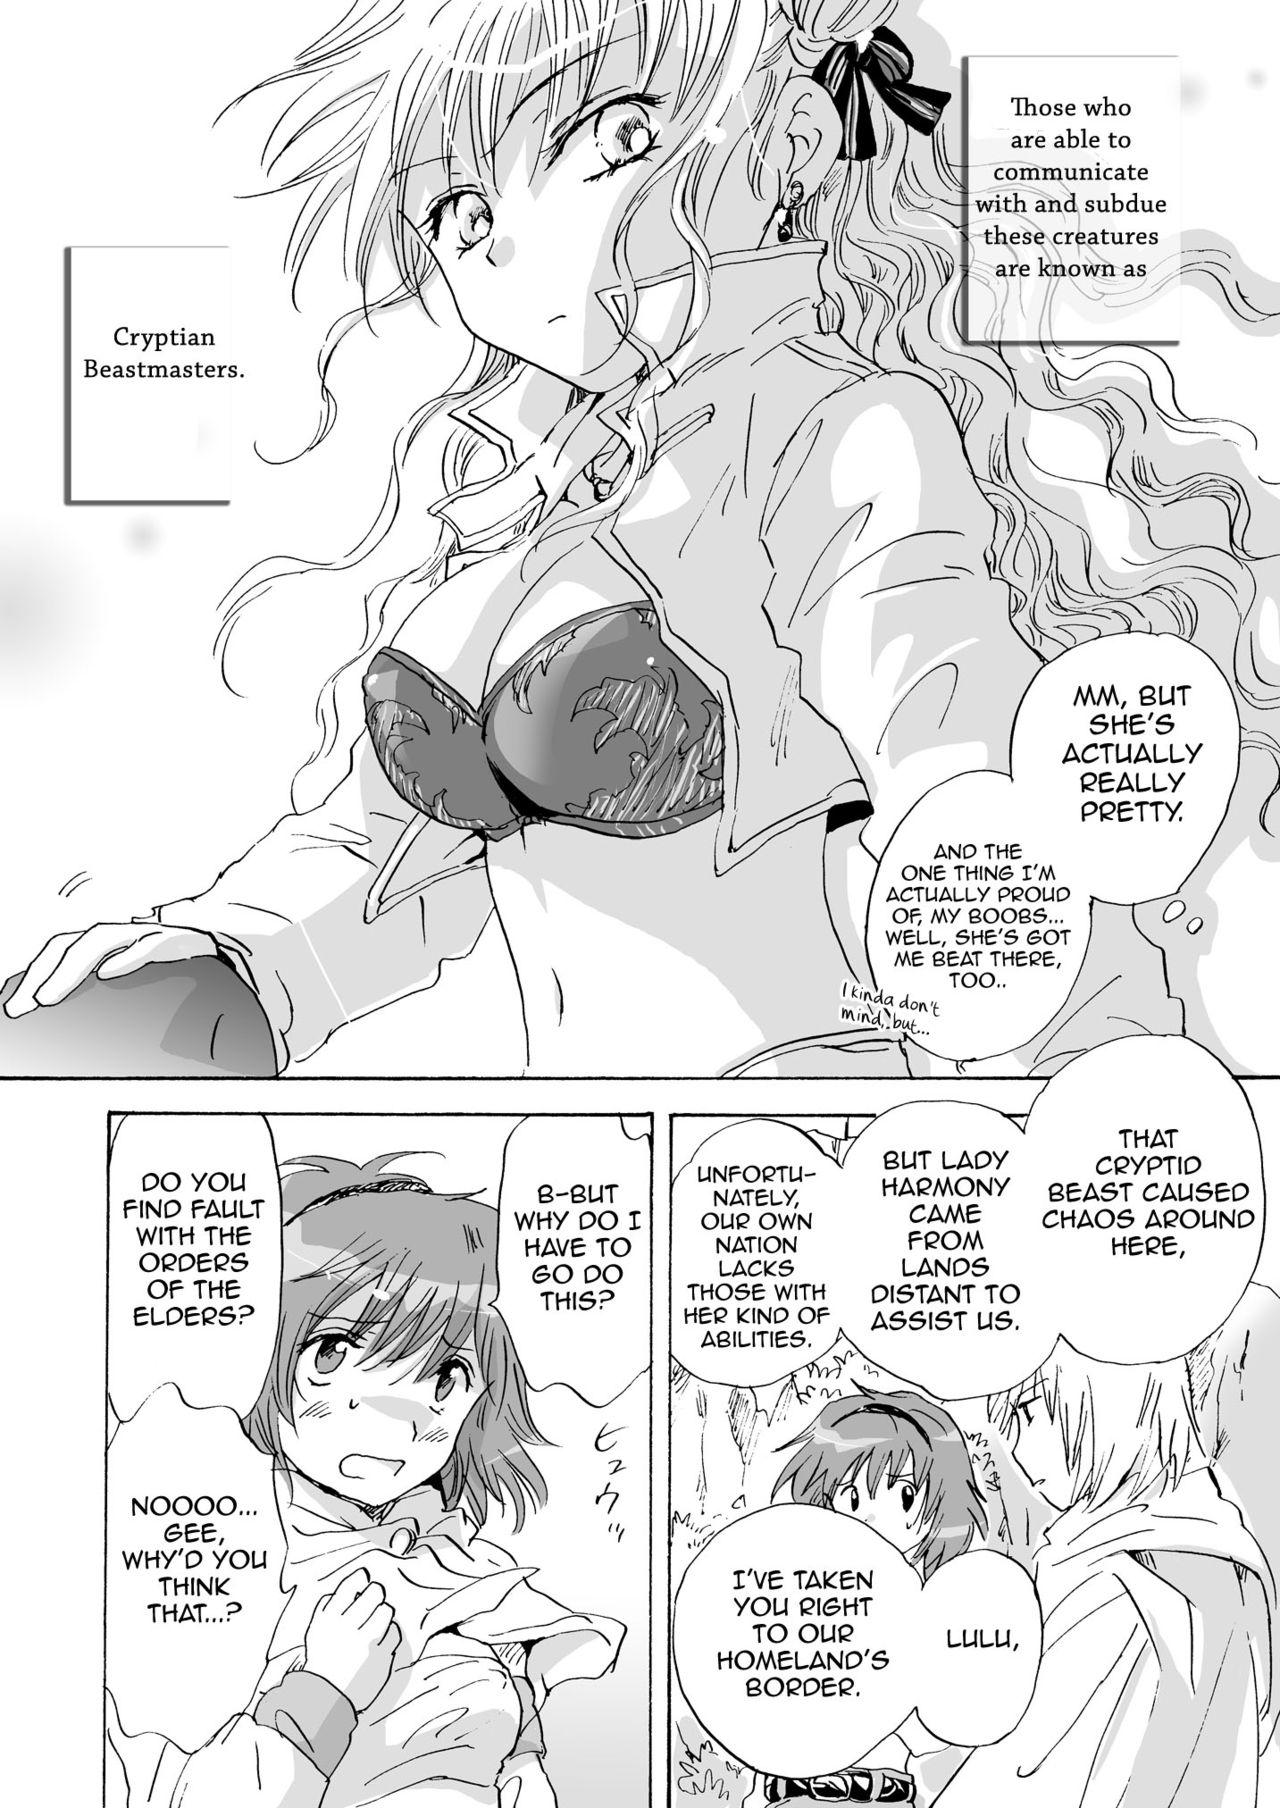 Fat Pussy Cutie Beast Complete Edition Ch. 1-2 Big Cock - Page 7